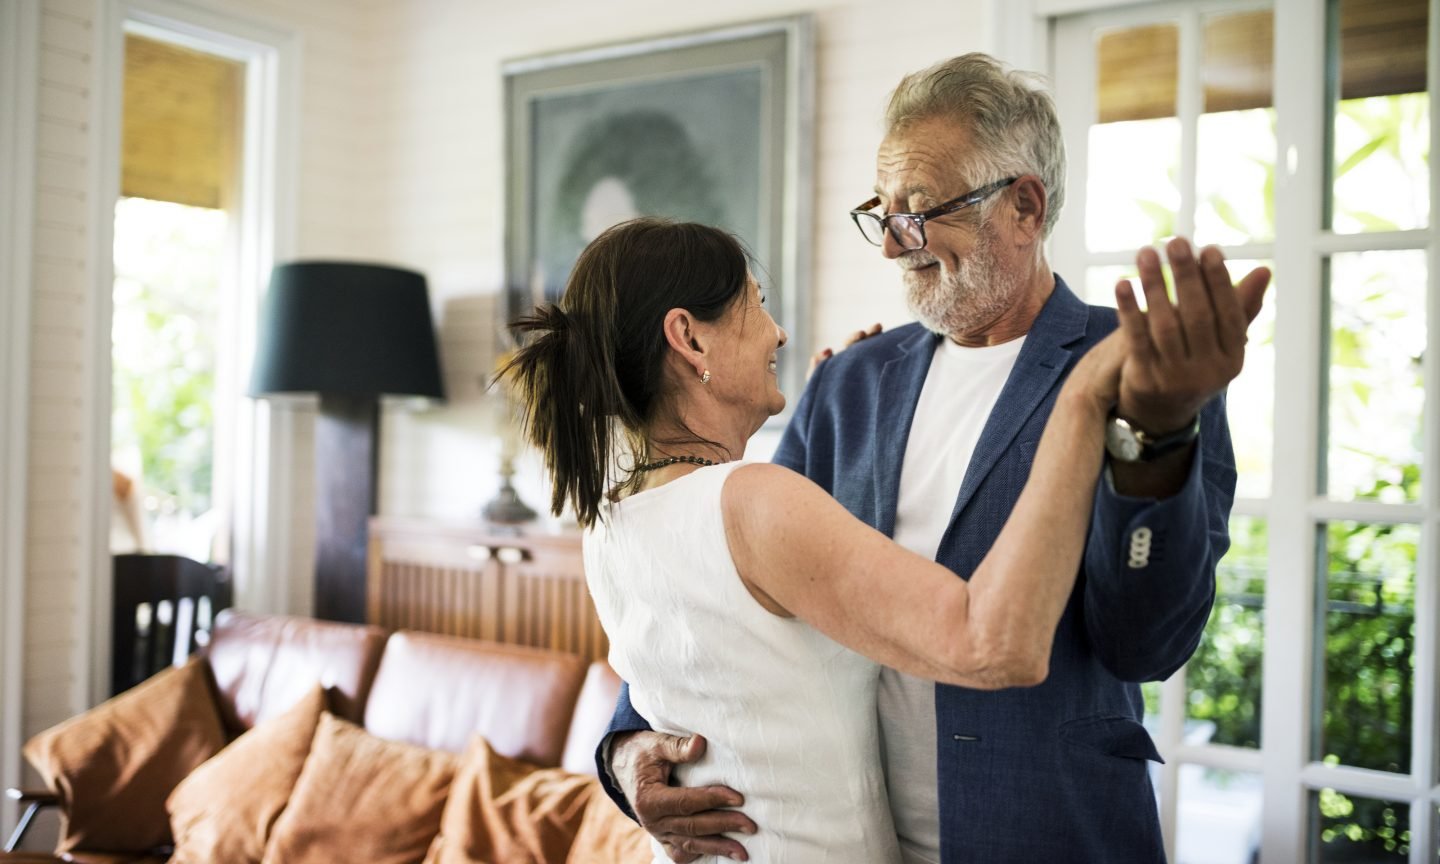 5 Tips for Finding Affordable Long-Term Care Insurance